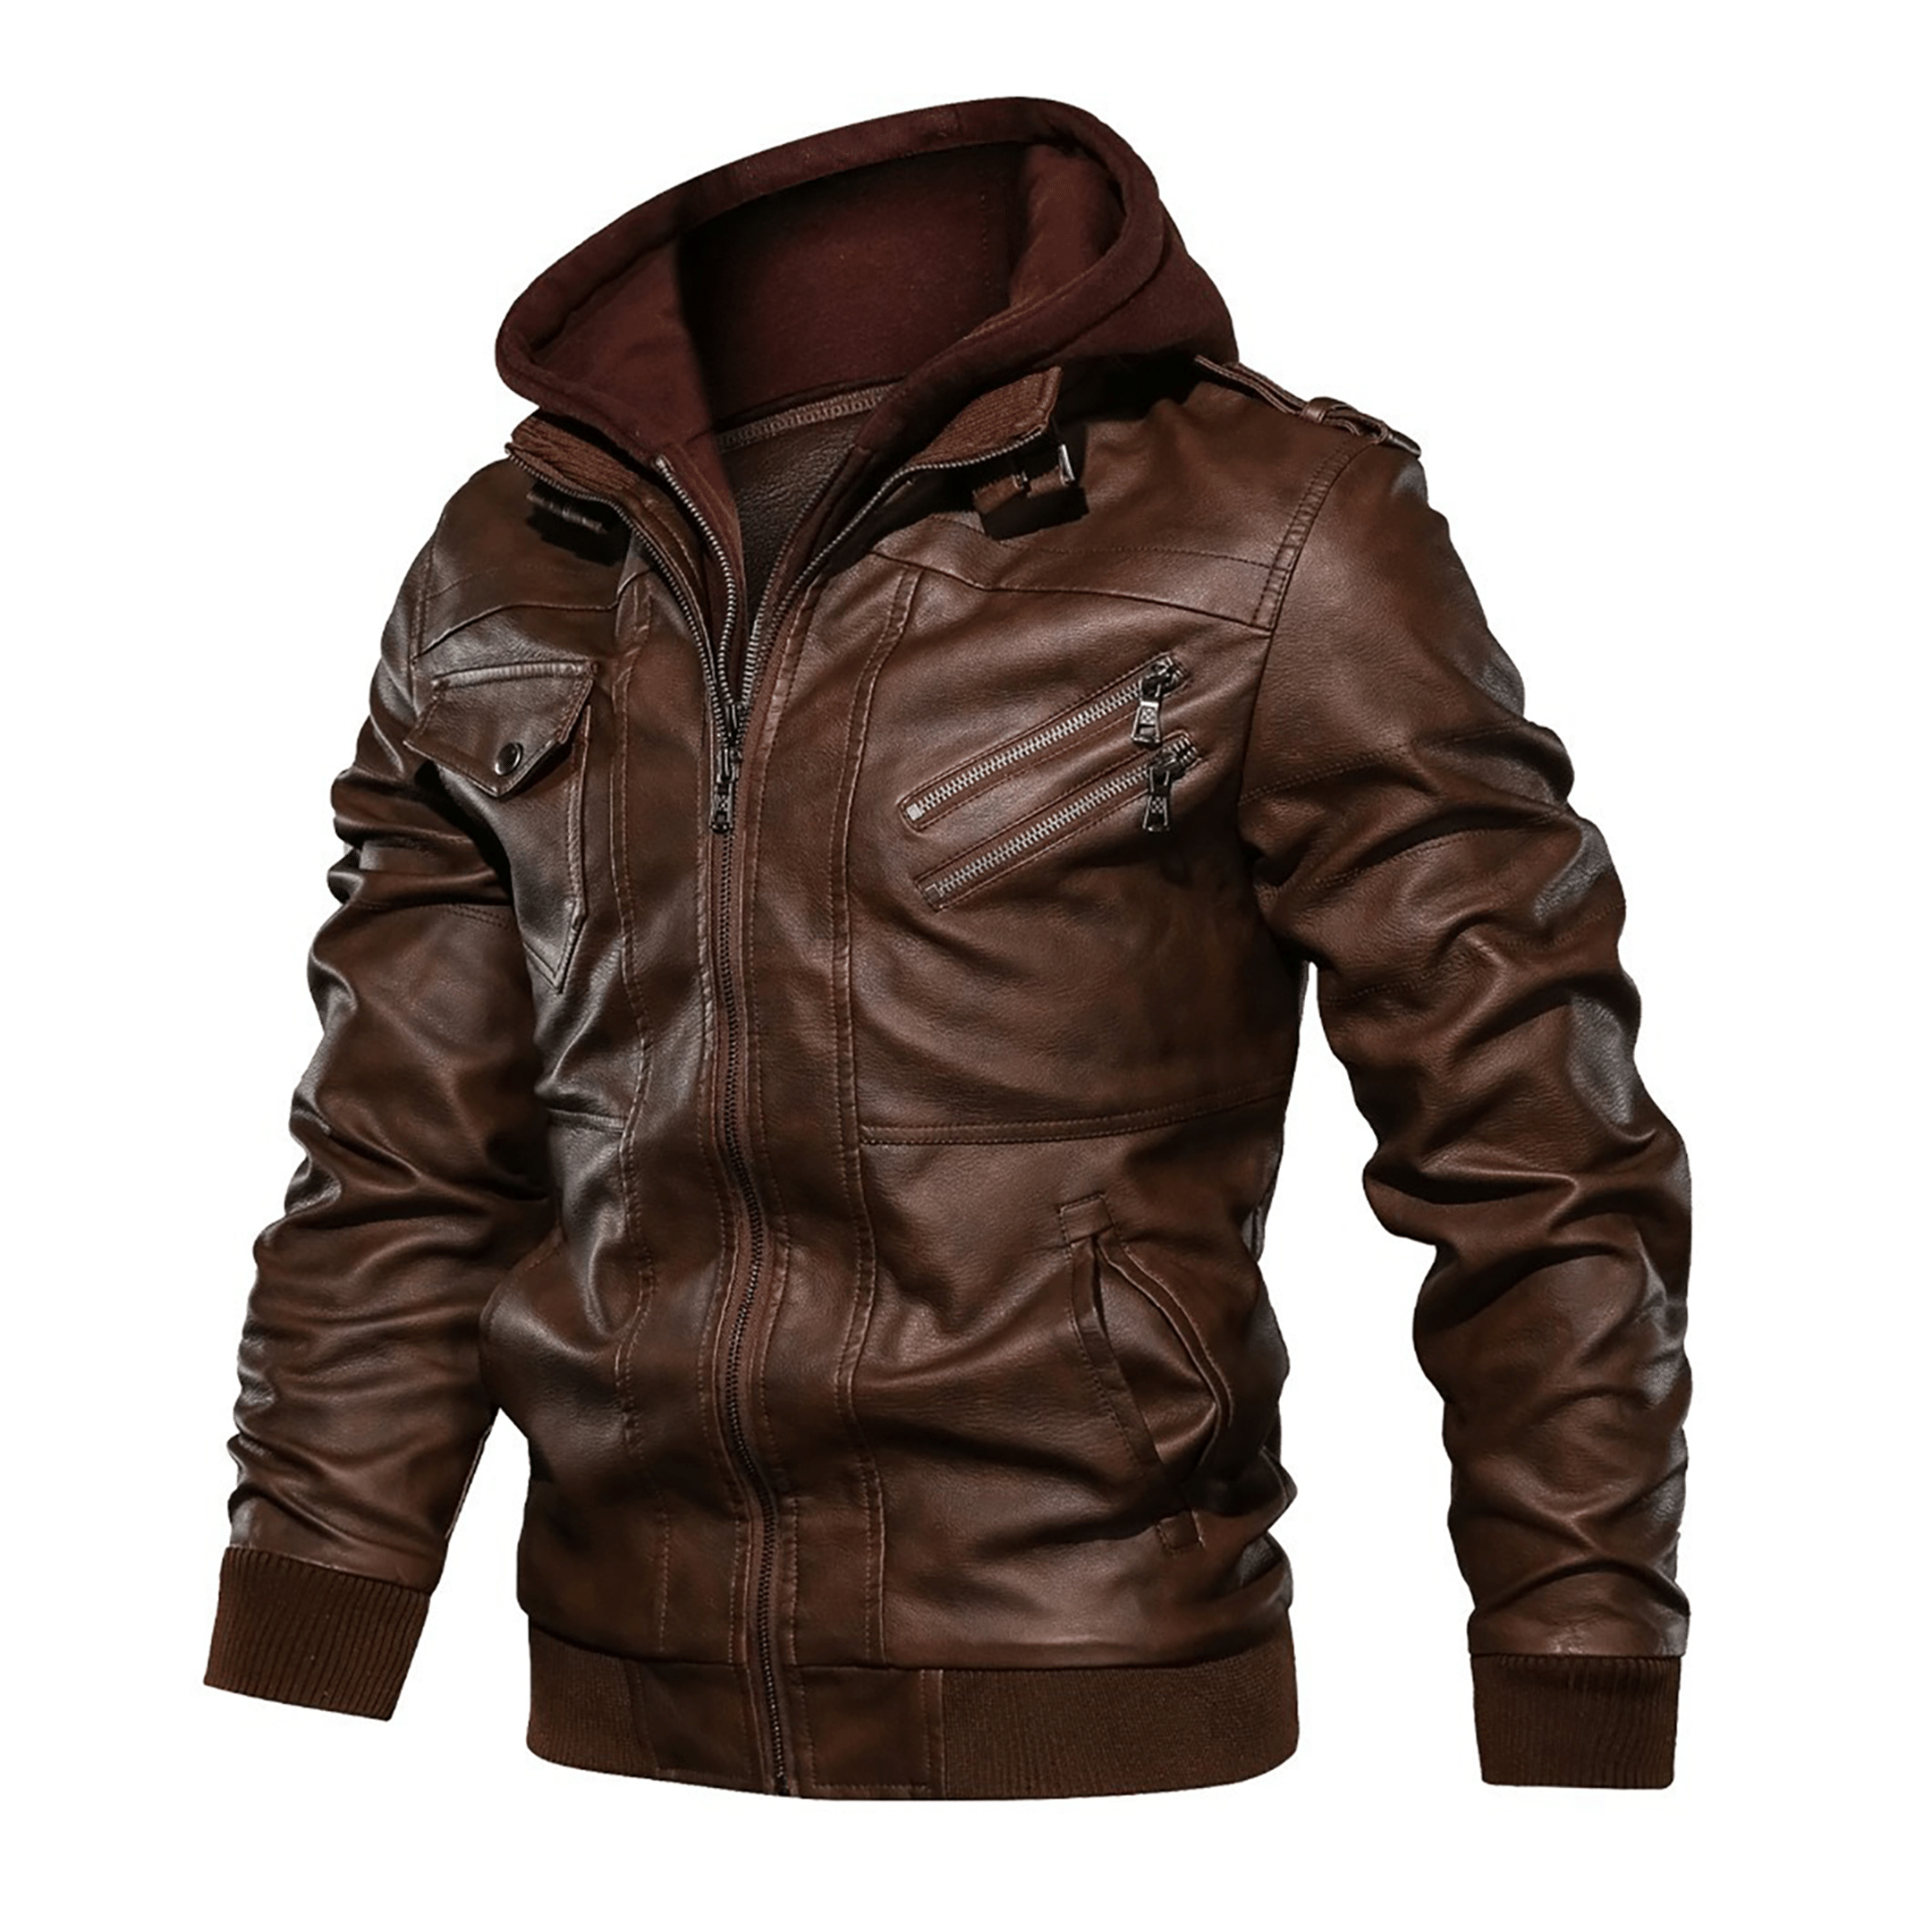 Top leather jackets and latest products 303